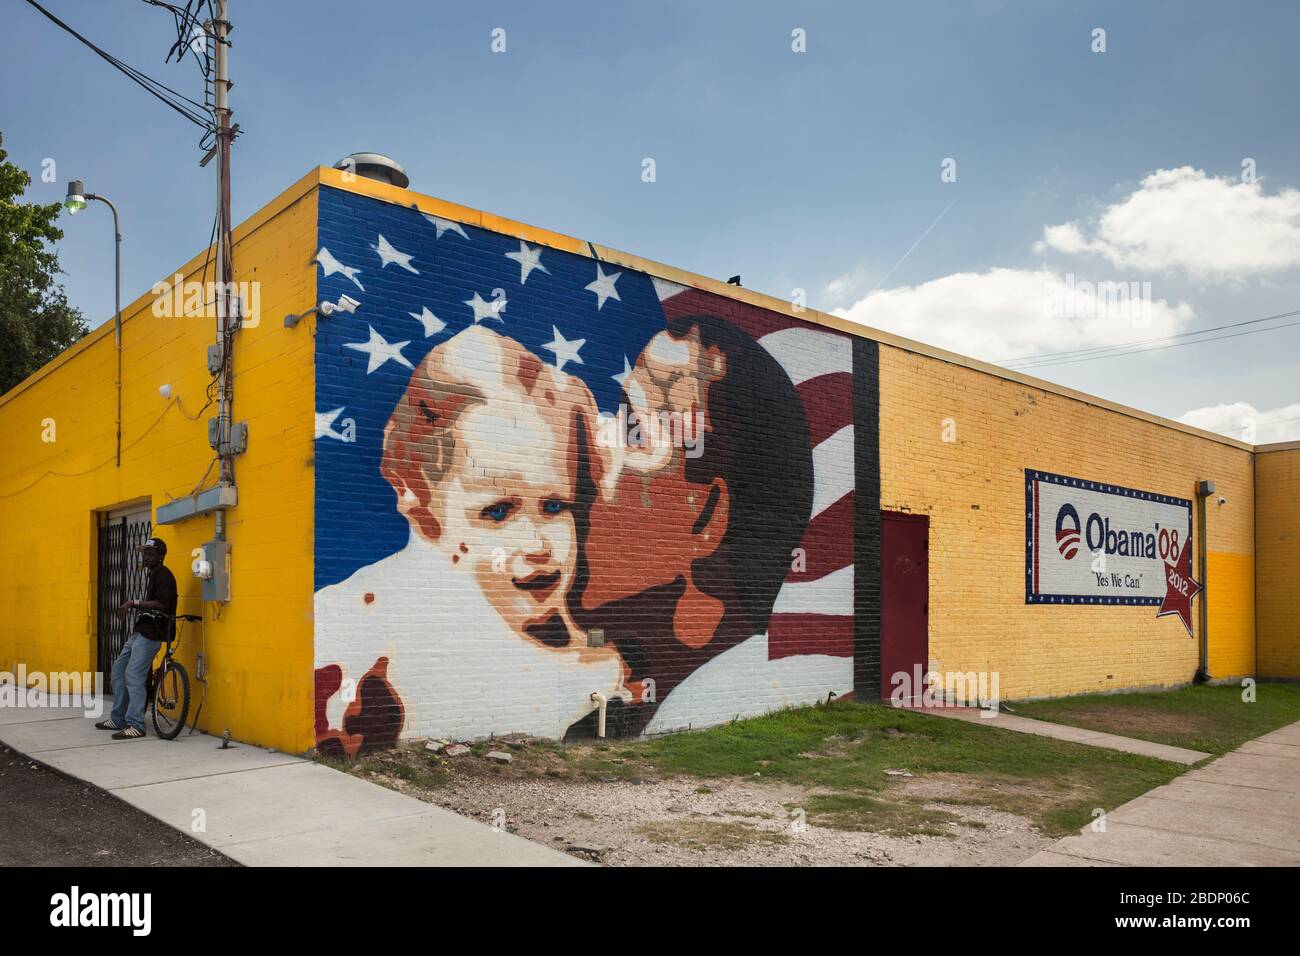 Obama’s Mural of electoral propaganda on a yellow wall close to a black race man leaning on a bicycle, West Alabama St, Midtown, Houston Texas Stock Photo